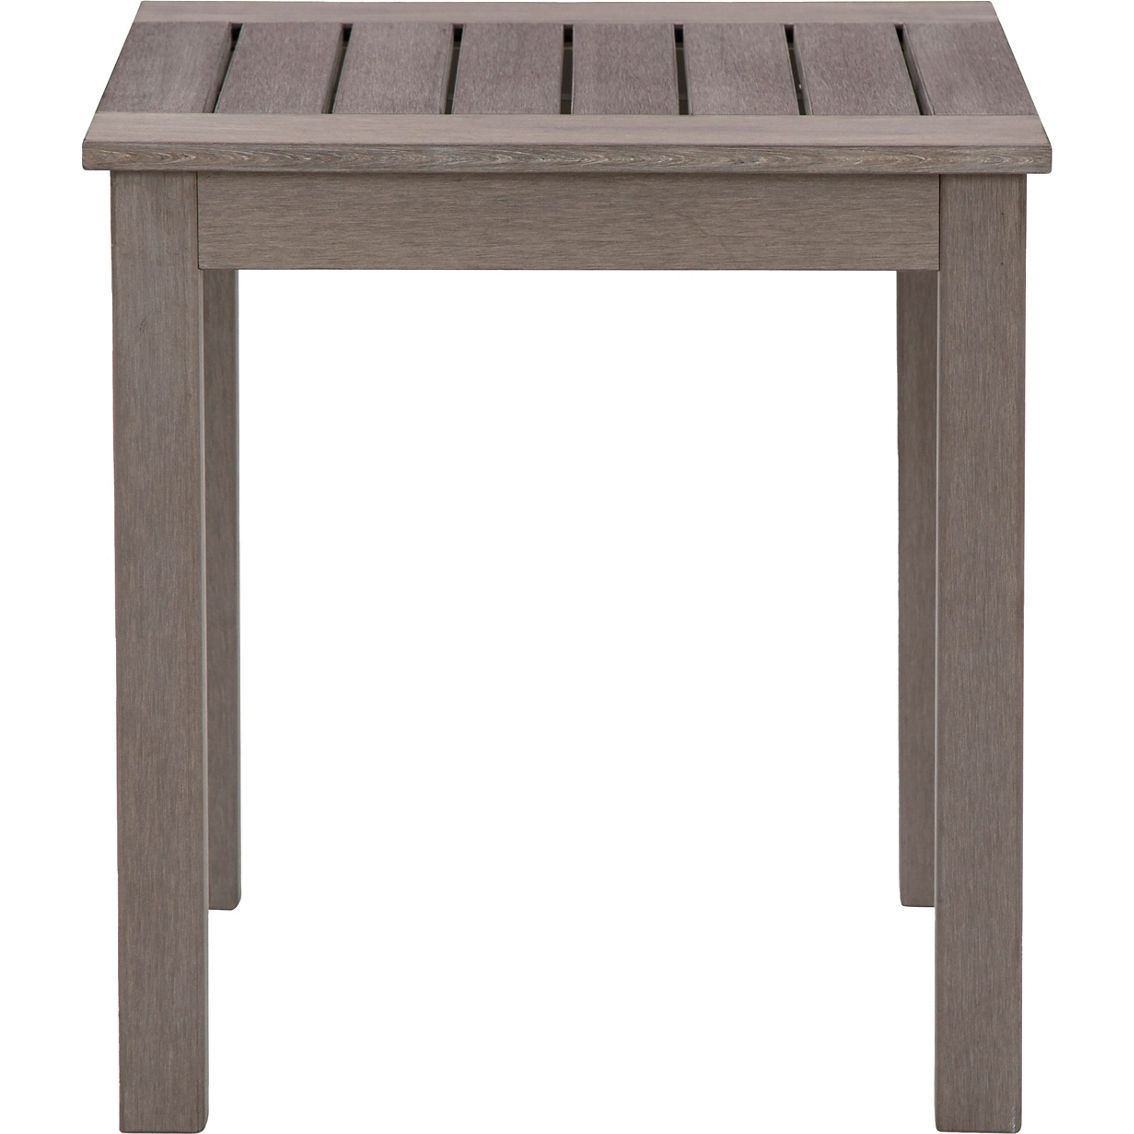 Signature Design by Ashley Hillside Barn Outdoor End Table - Image 2 of 5